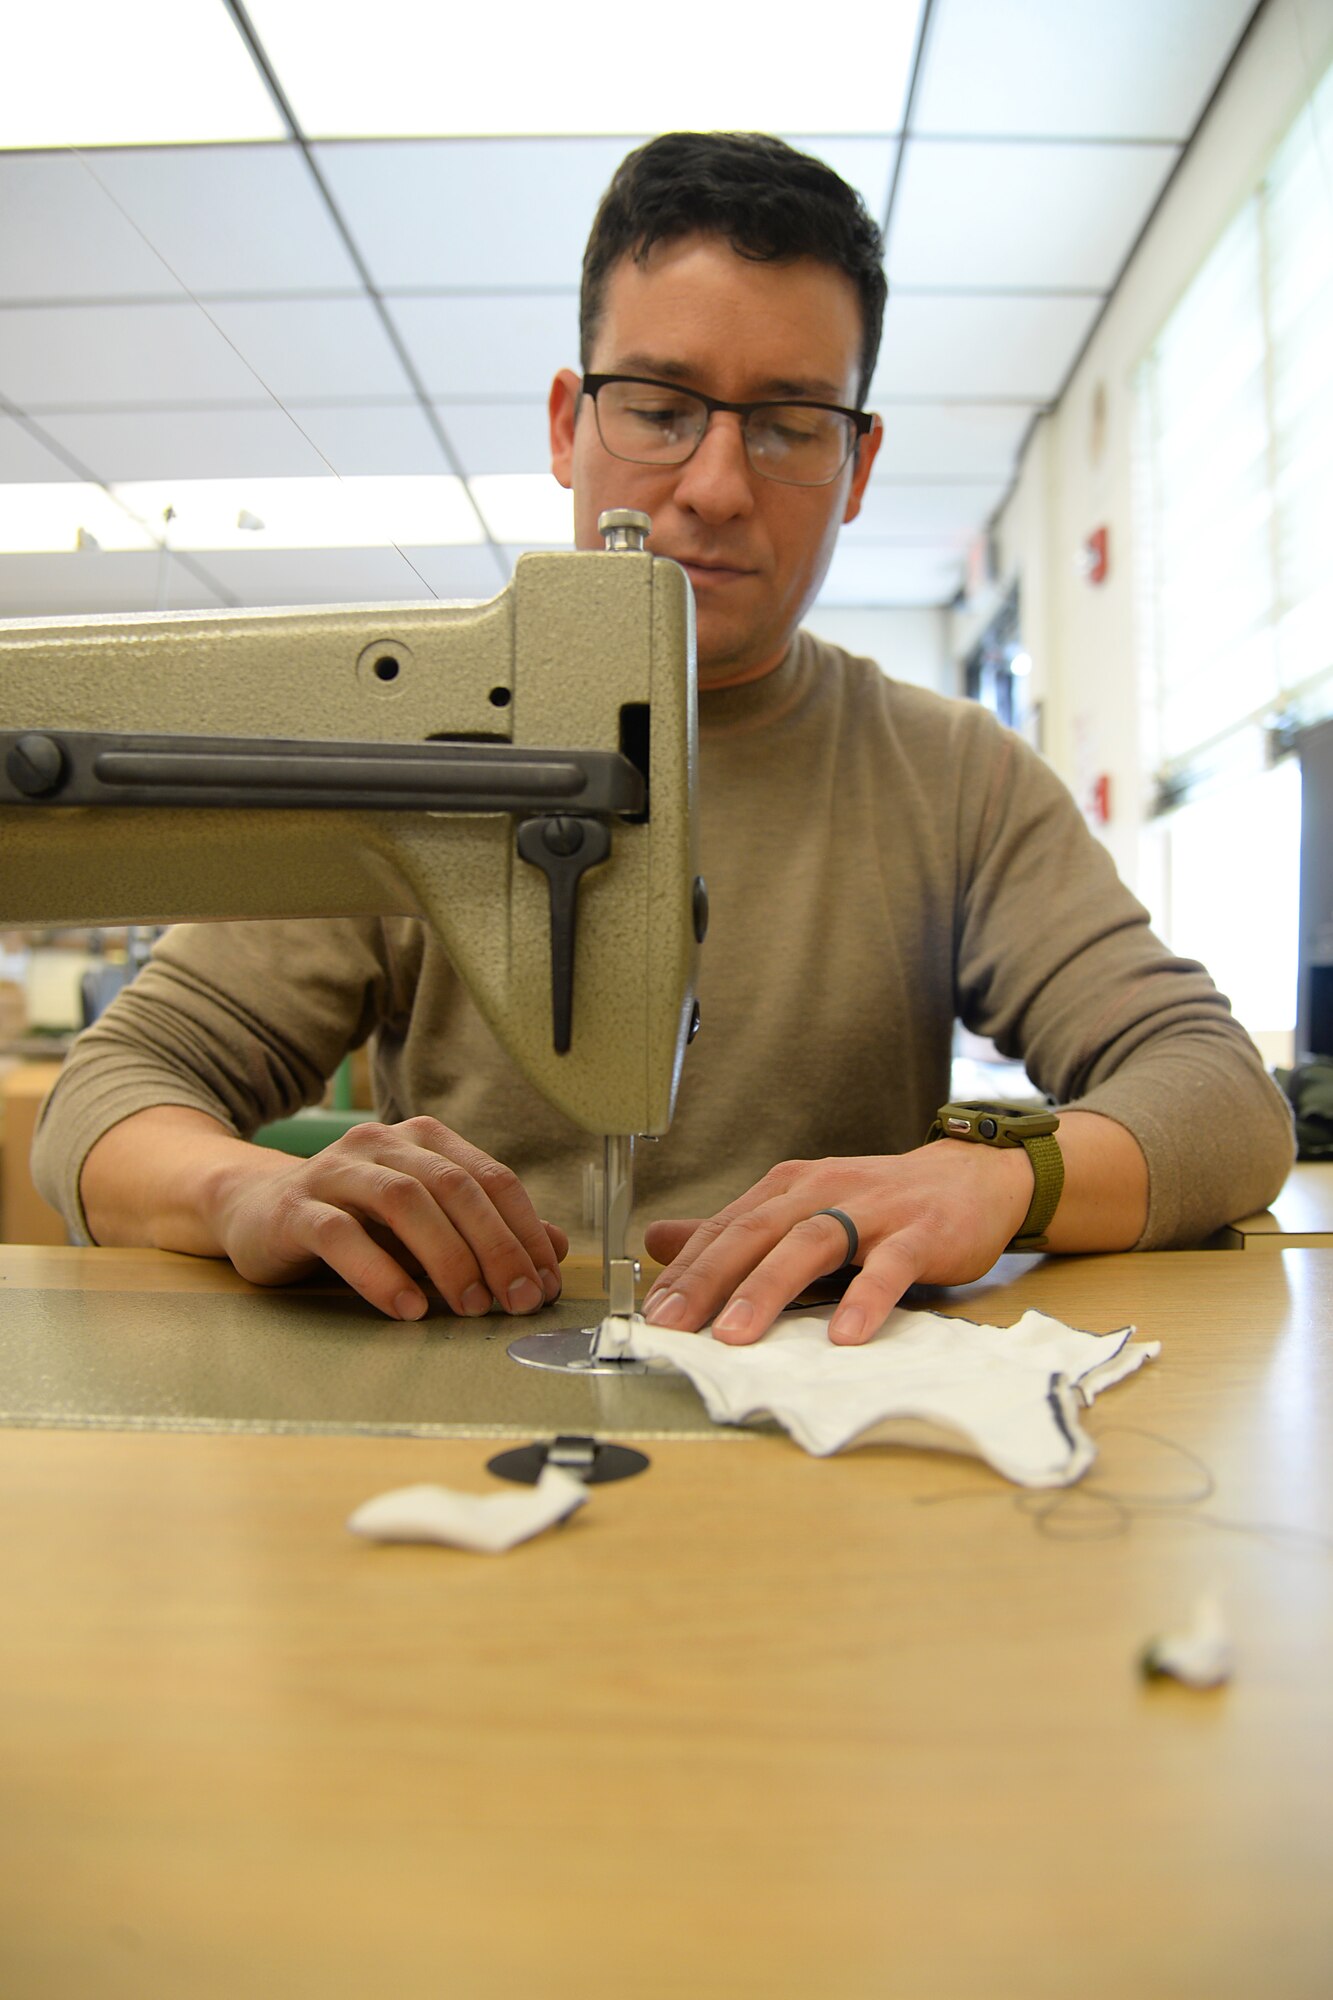 A picture of U.S. Air Force Master Sgt. Kyle P. Brier, an Aircrew Flight Equipment craftsman, sewing face masks.